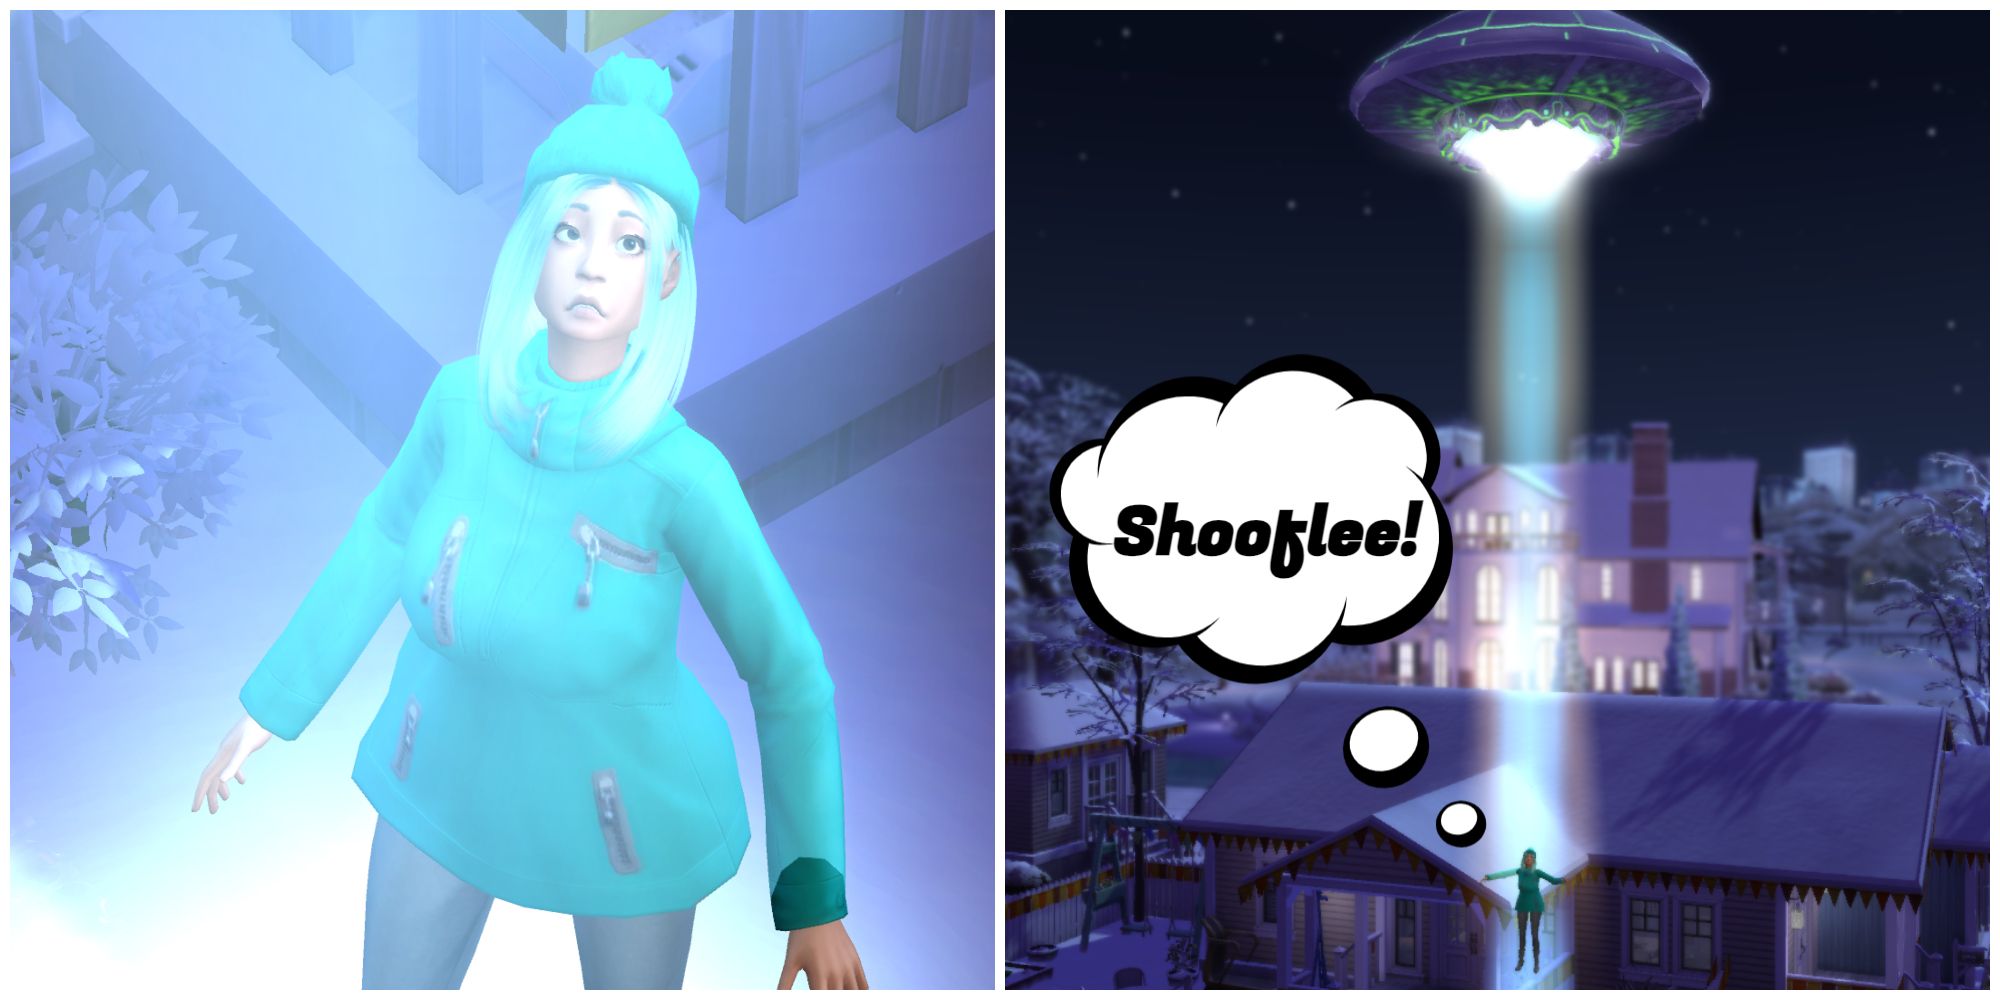 Shooflee! Says the Sim who is currently being abducted by aliens